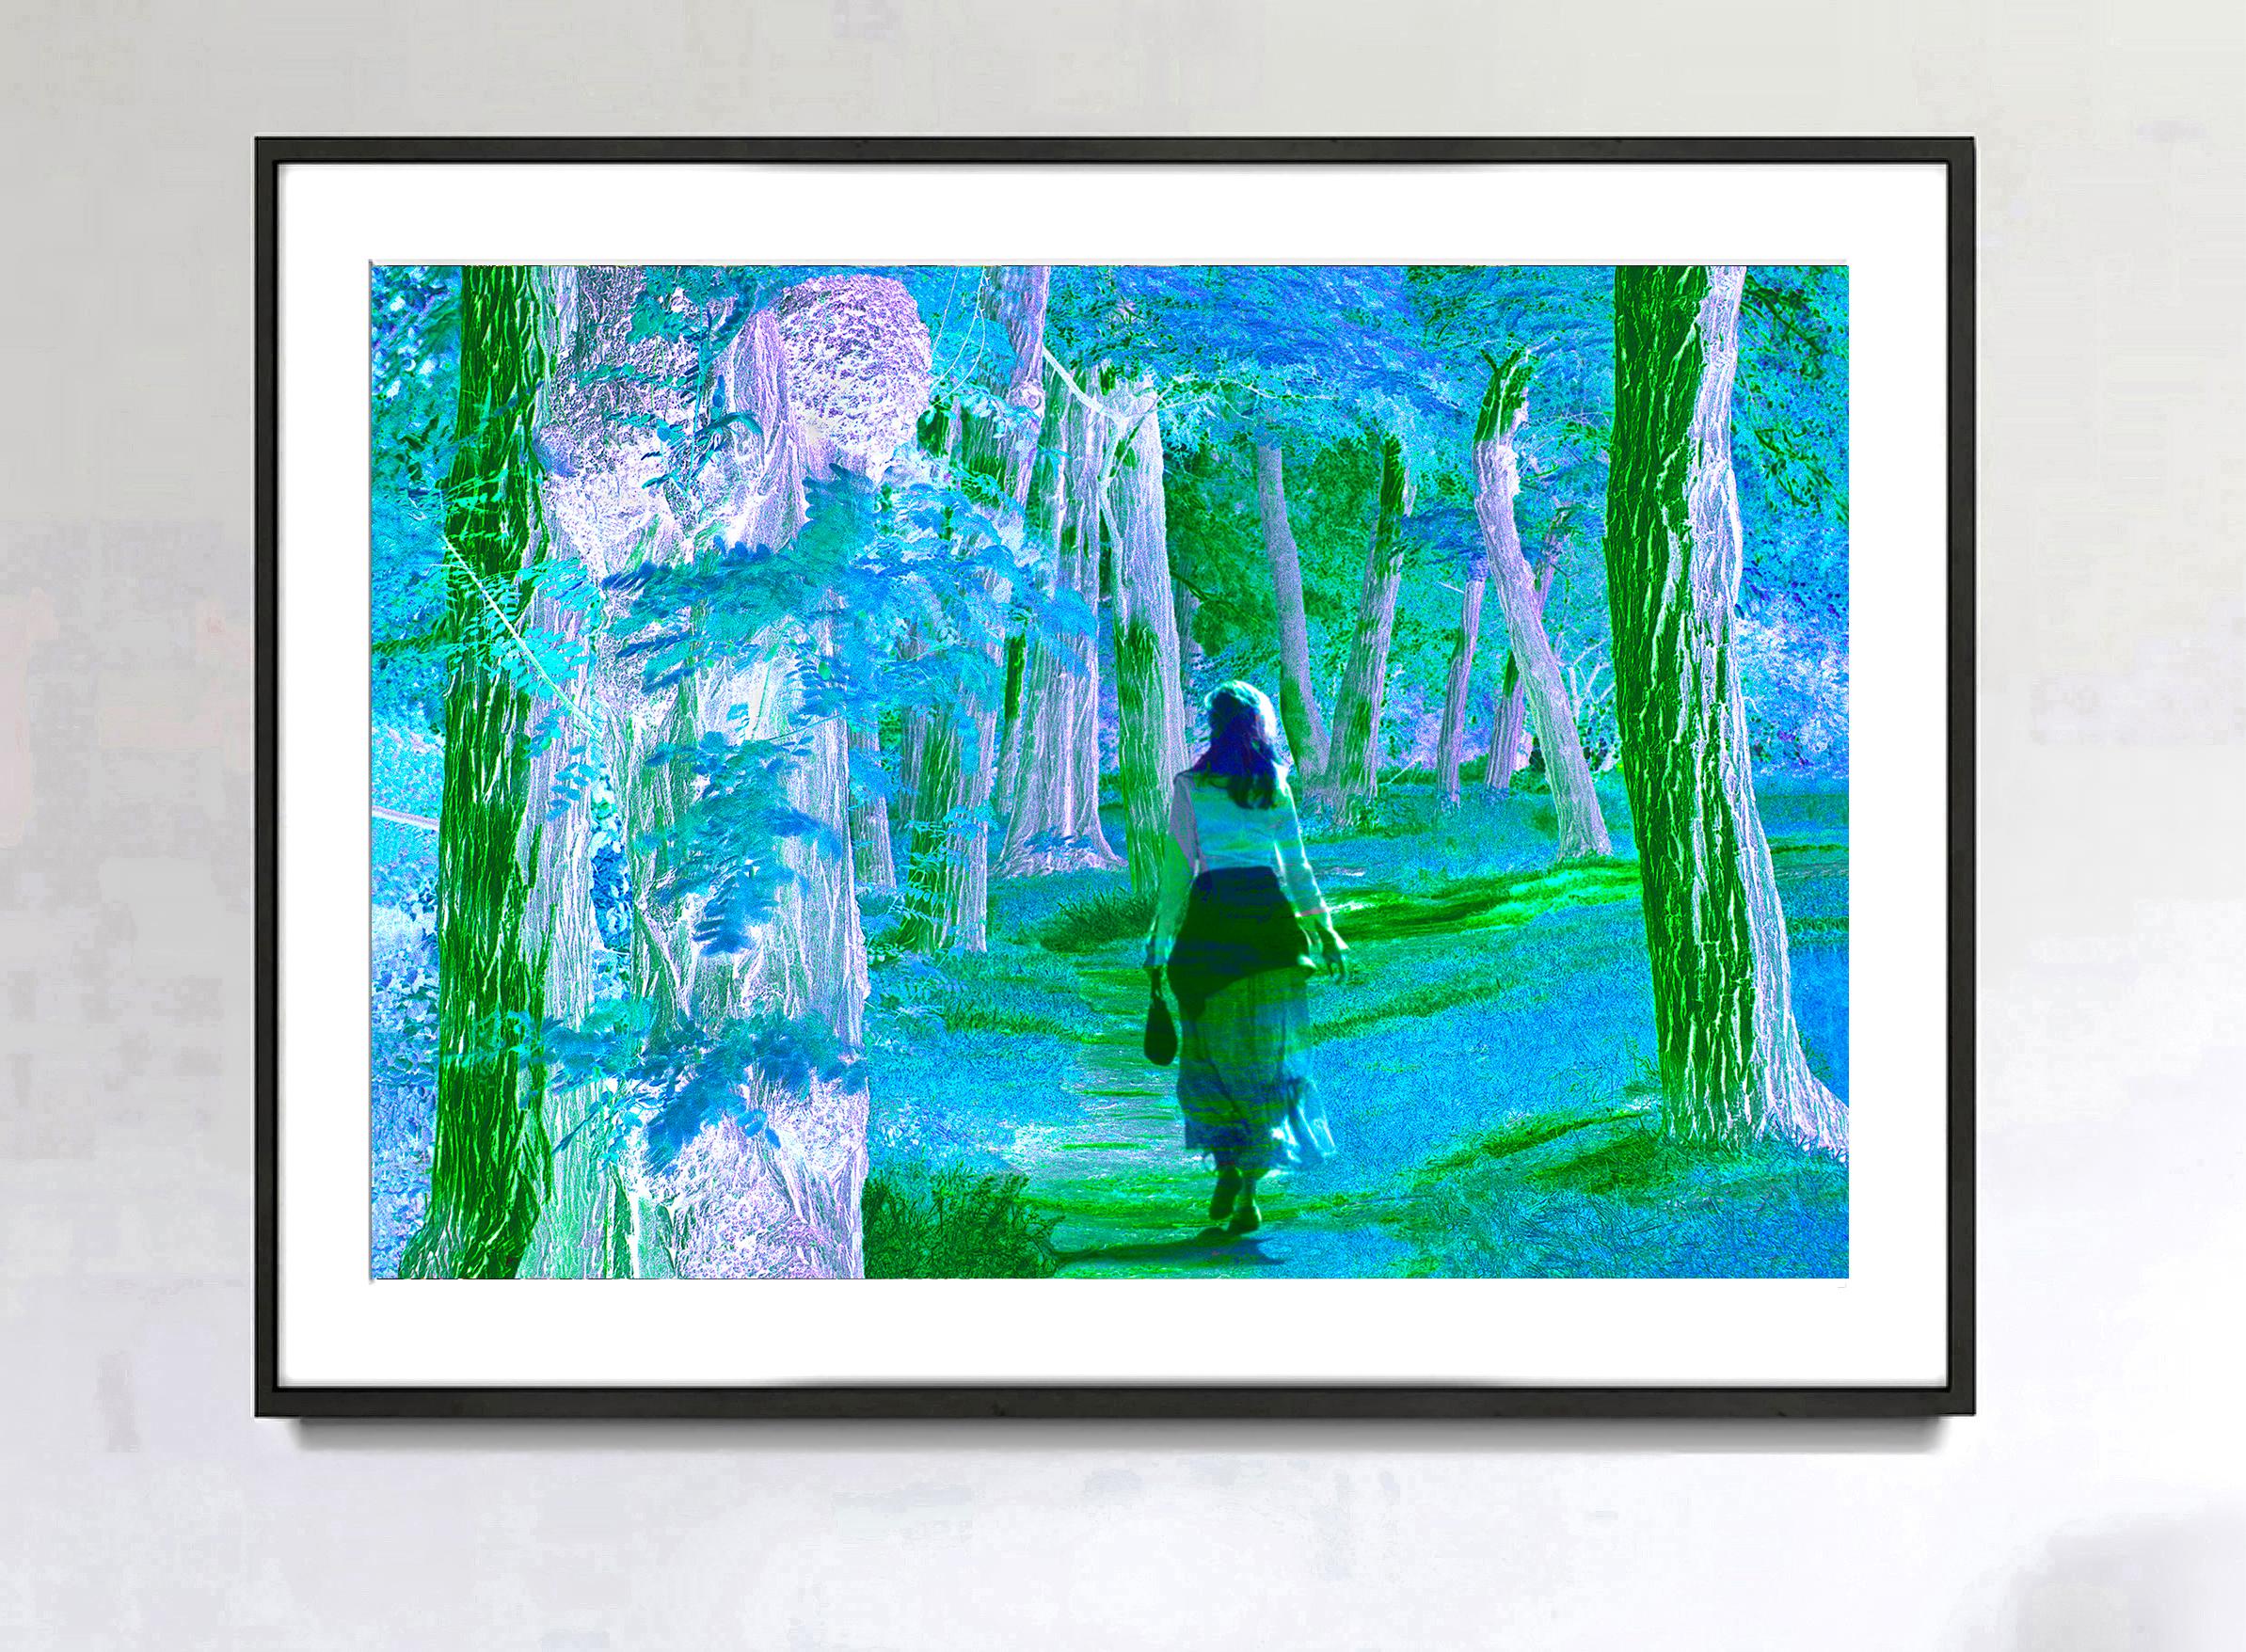  Dream Landscape - Woman Strolls in Fantasy Forest of Blue Green - Photograph by Mitchell Funk